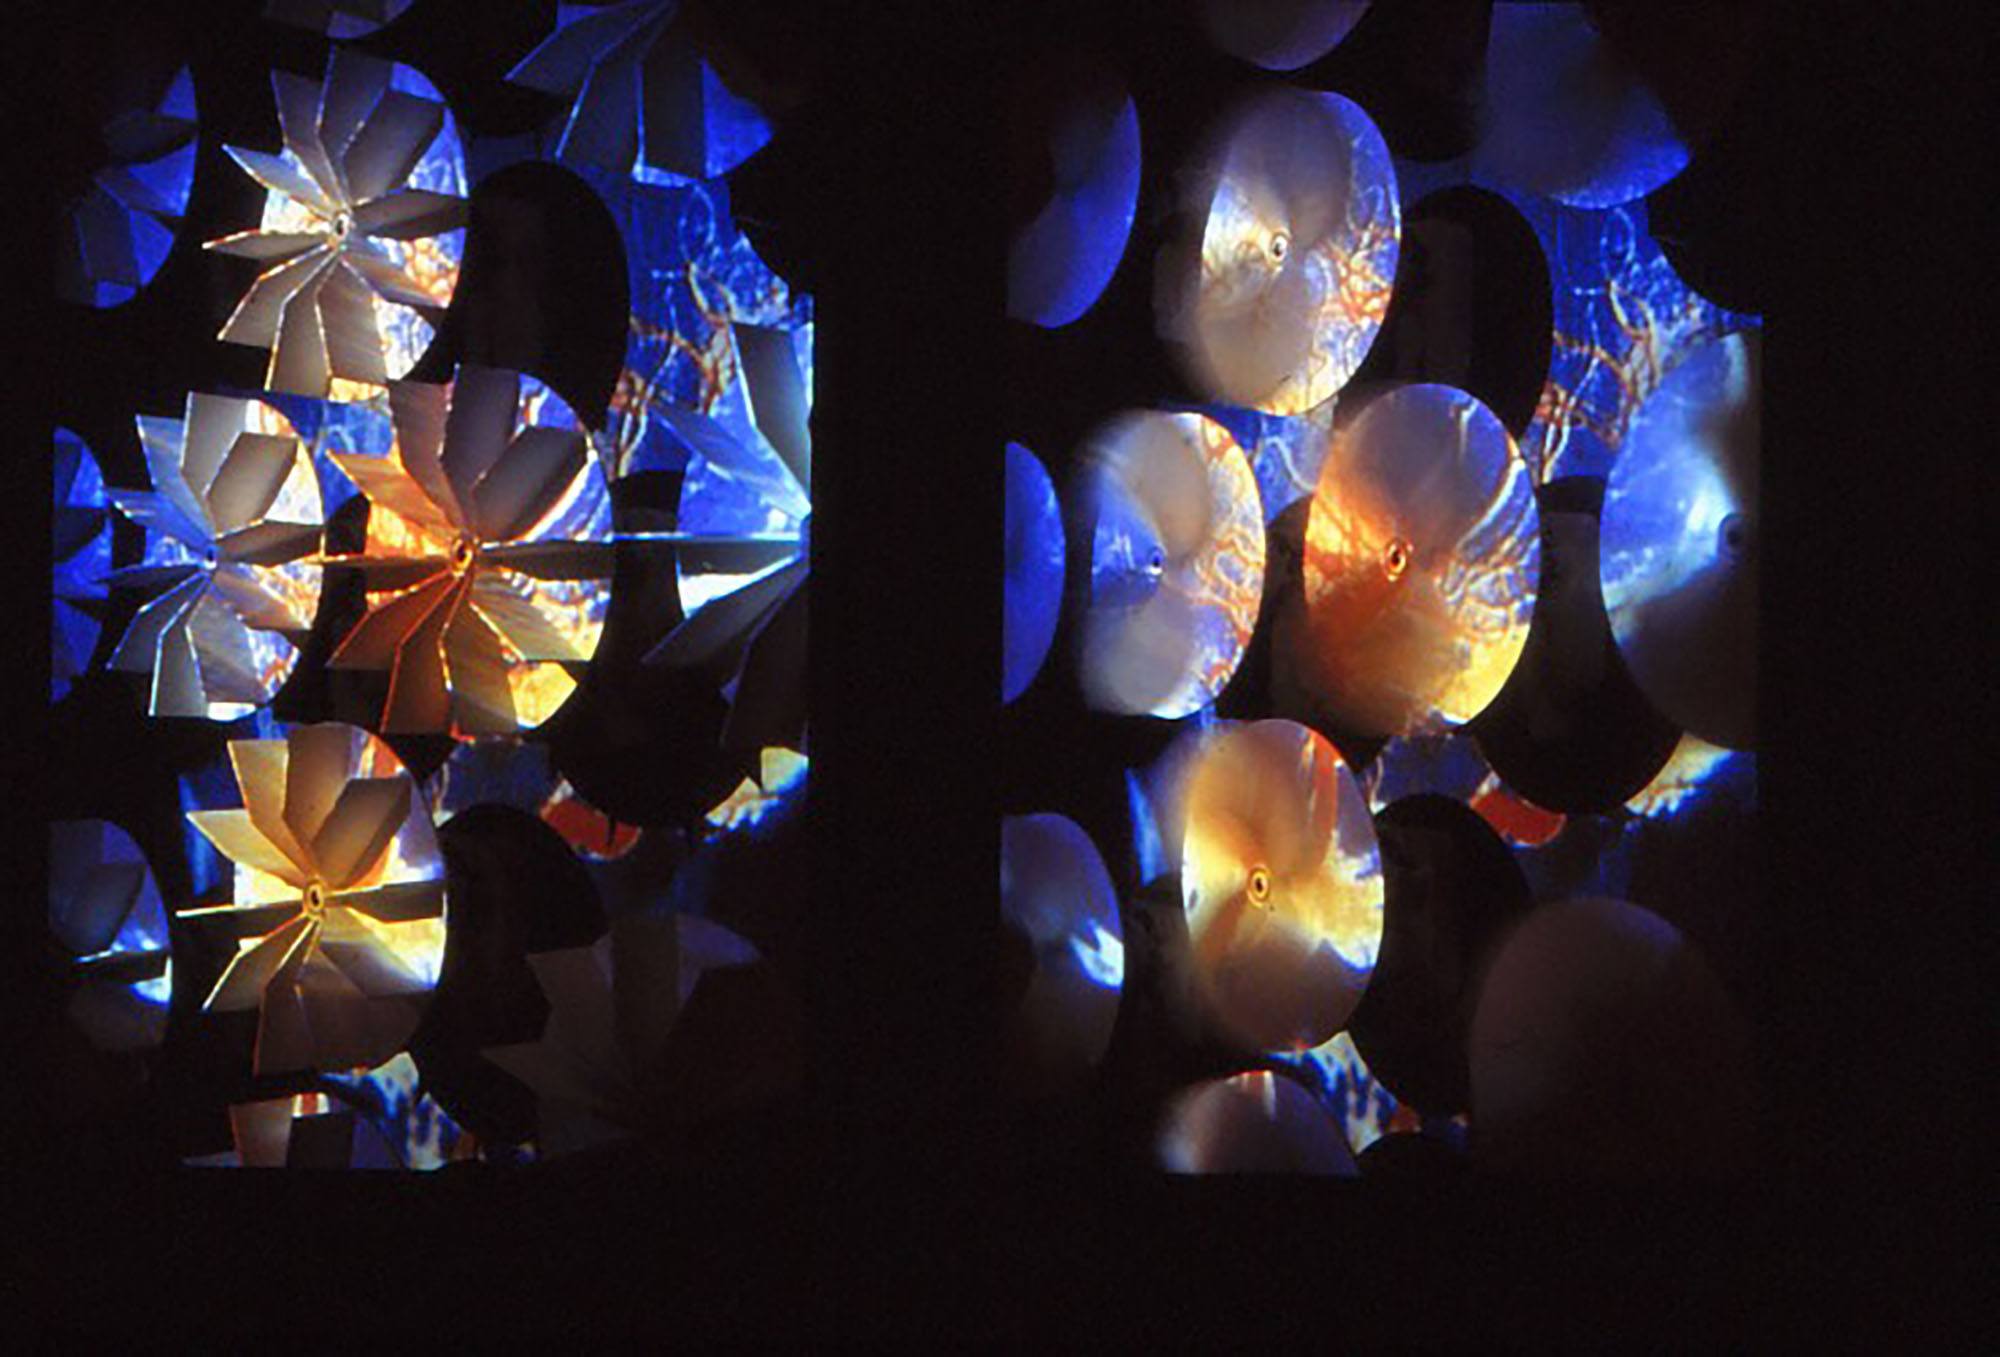 Light and color patterns in blue and orange projected onto round objects